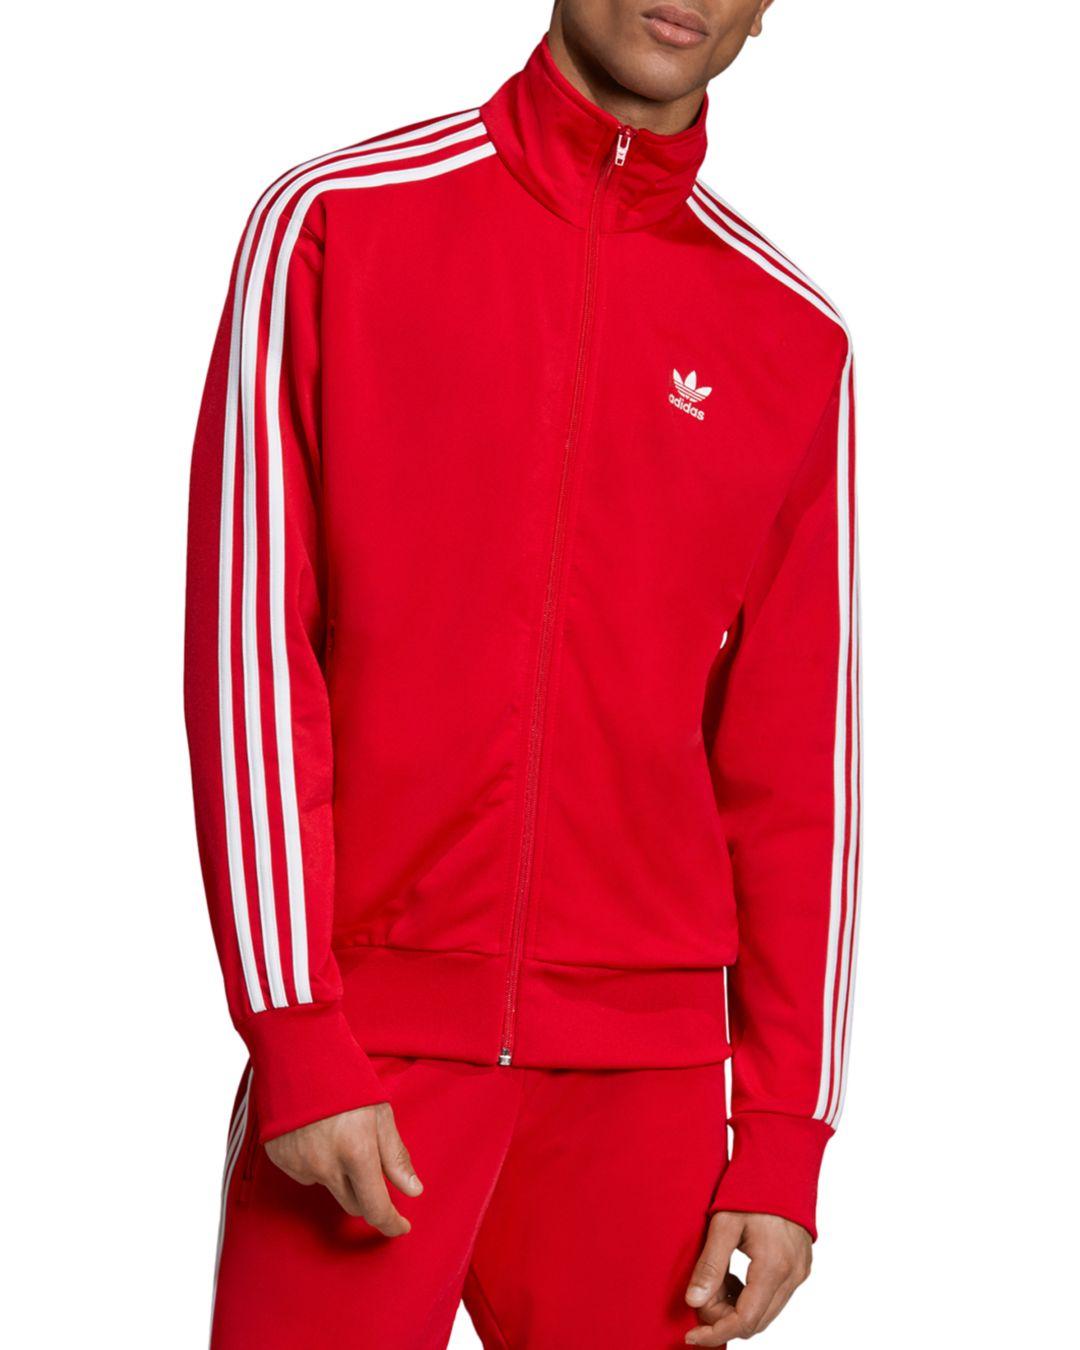 adidas Originals Tricot Jacket in Red for |